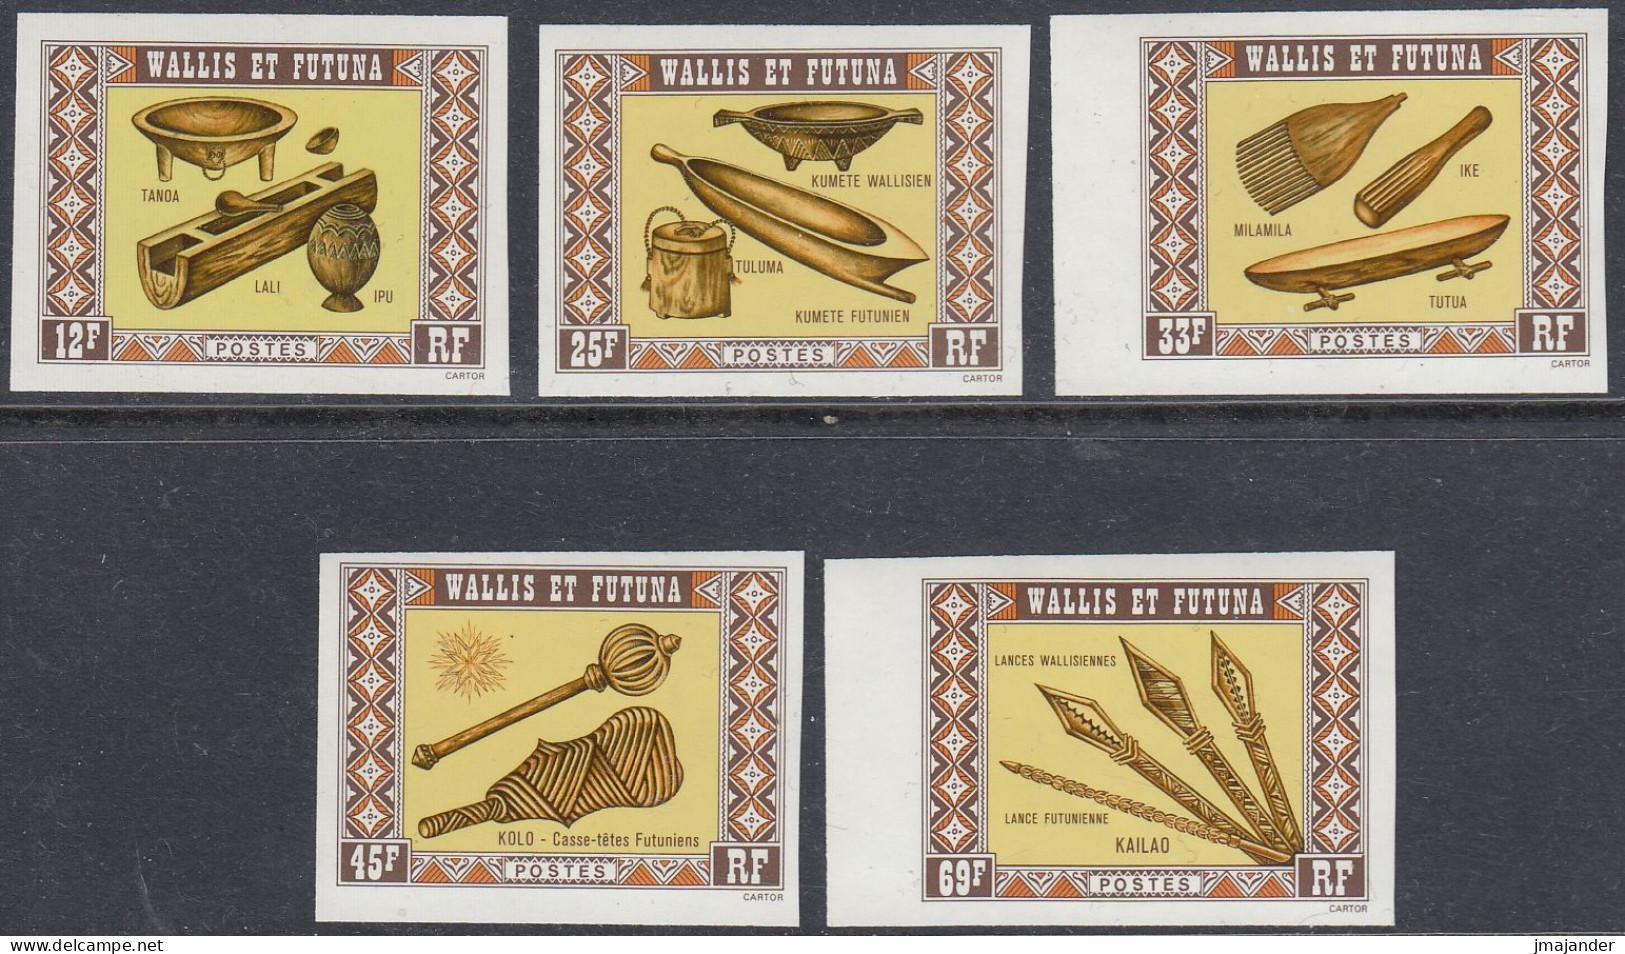 Wallis And Futuna 1977 - Handicrafts: Wood Carvings - Set Of 5 Imperforate Stamps - Mi 286-290 ** MNH - Imperforates, Proofs & Errors